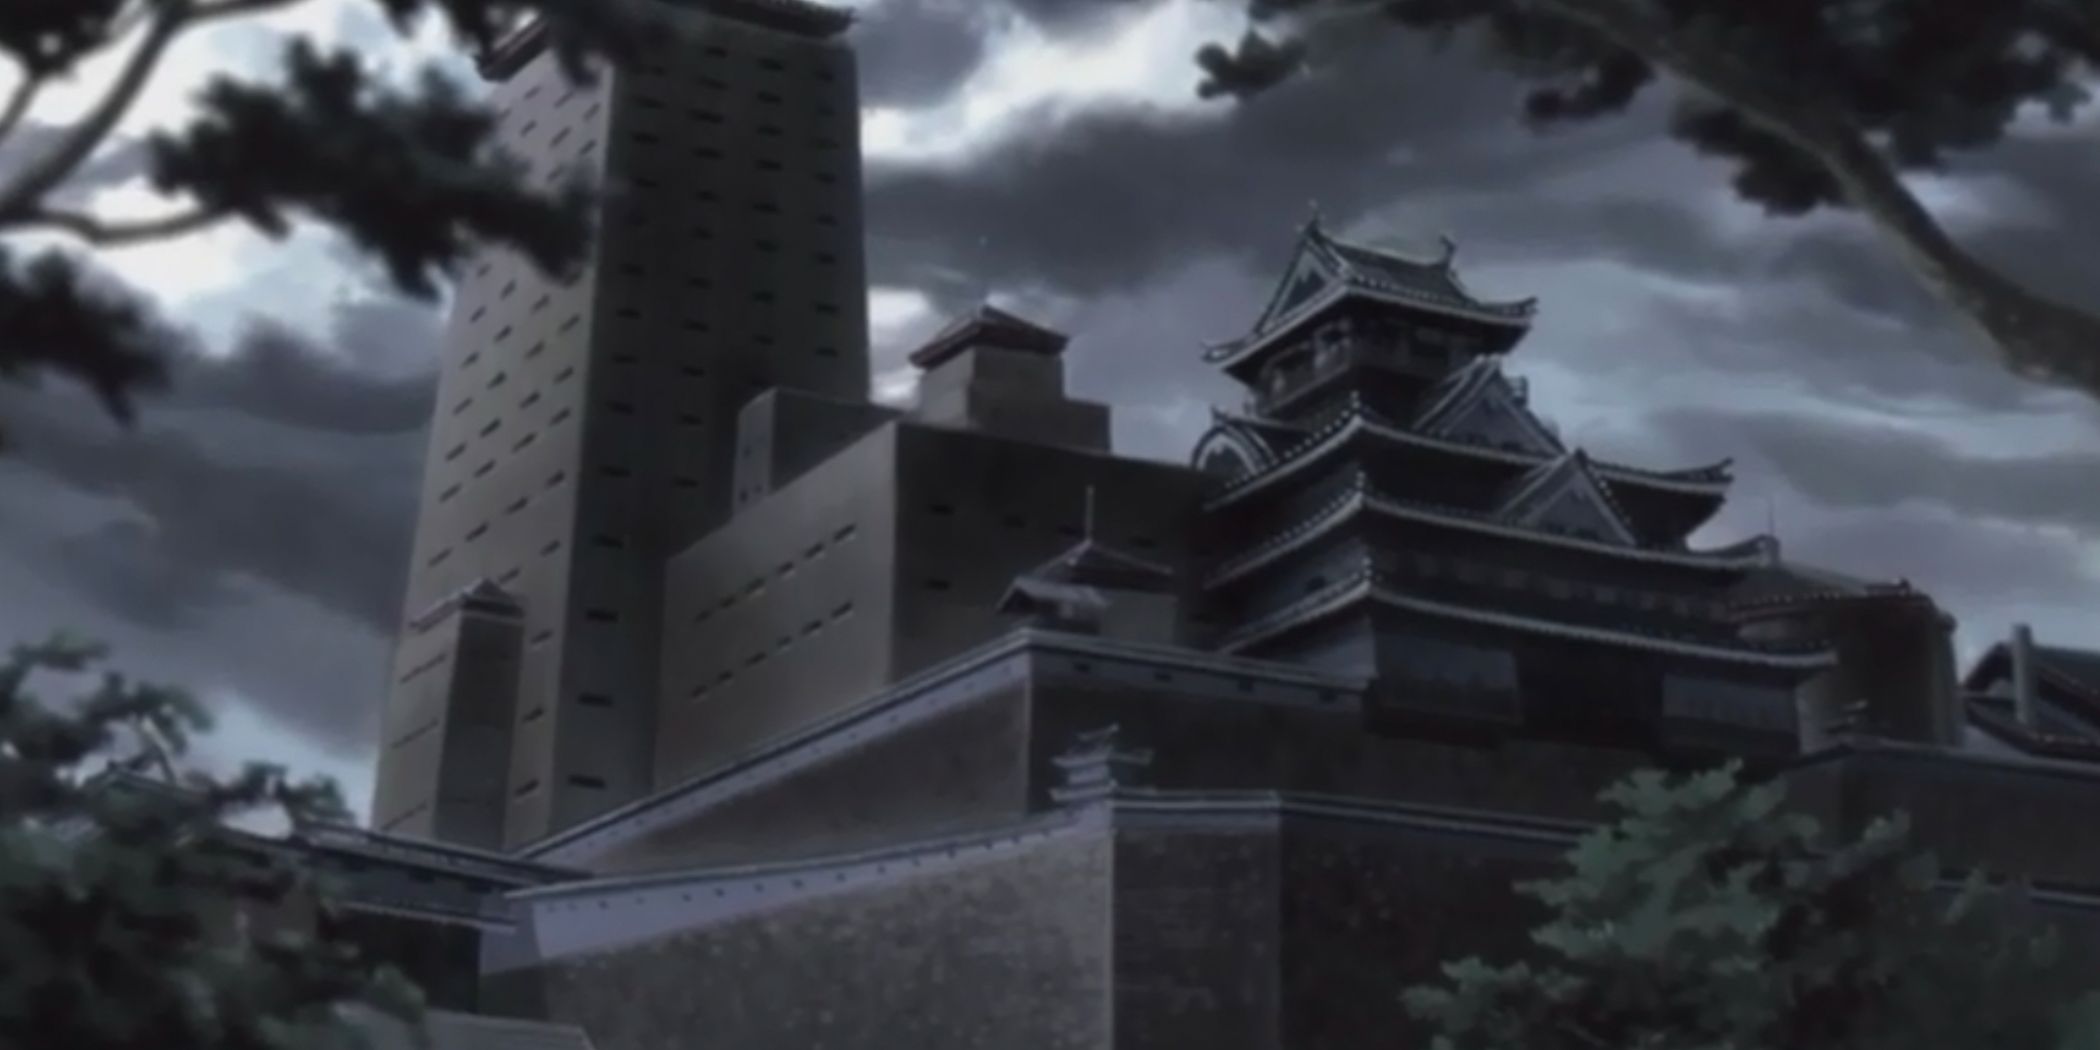 An image of the Blood Prison in Naruto